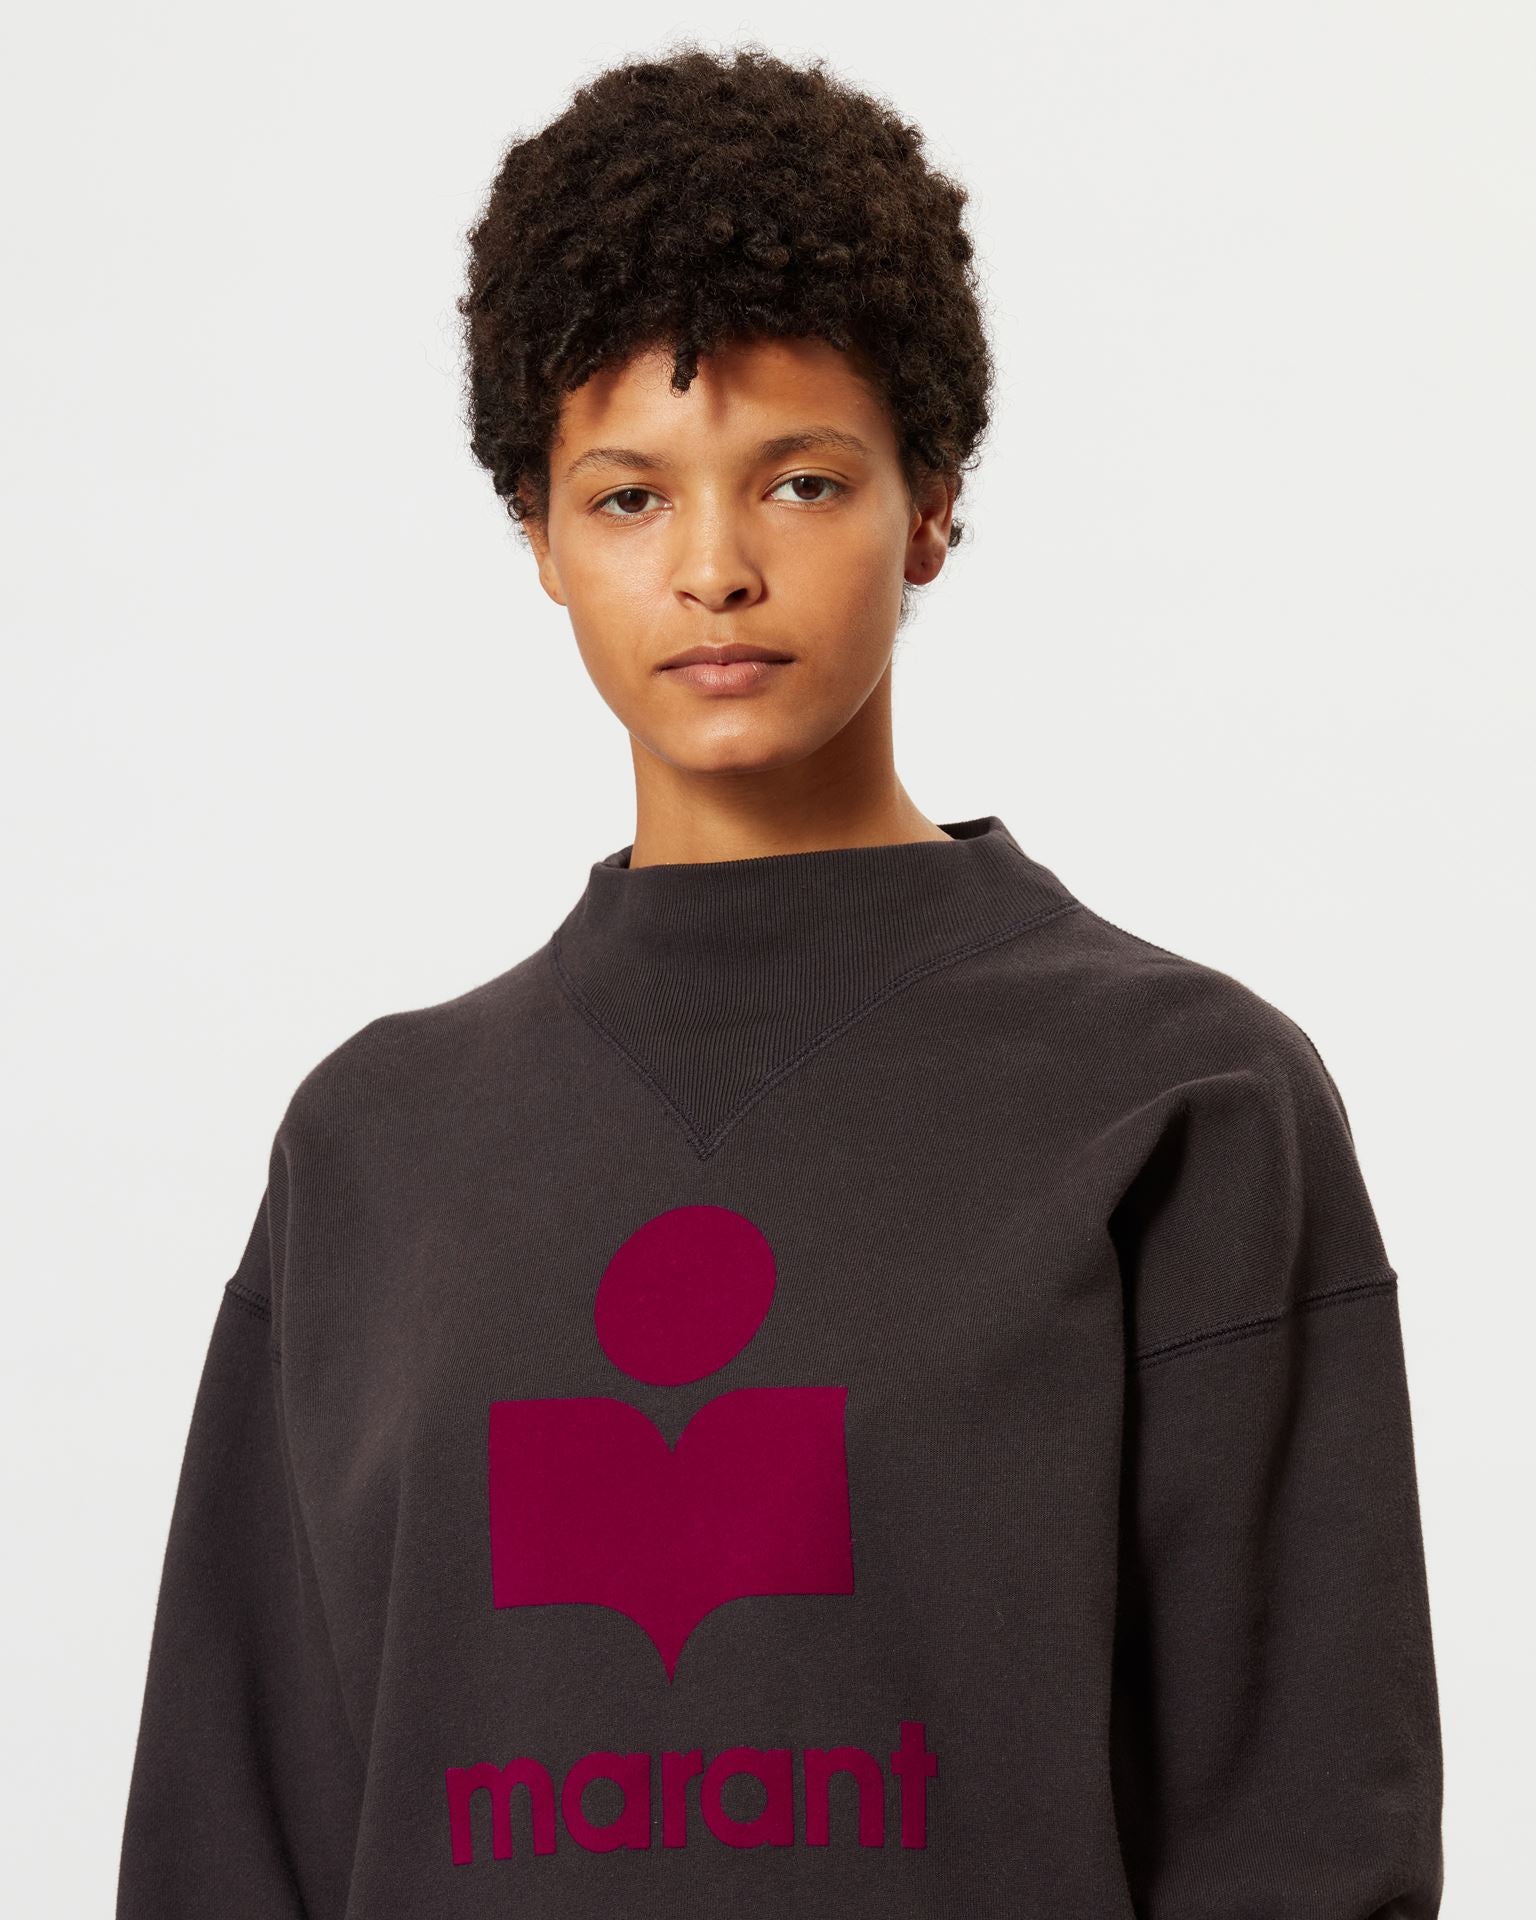 The Isabel Marant Moby Sweatshirt in Faded Night Fuchsia available at The New Trend Australia